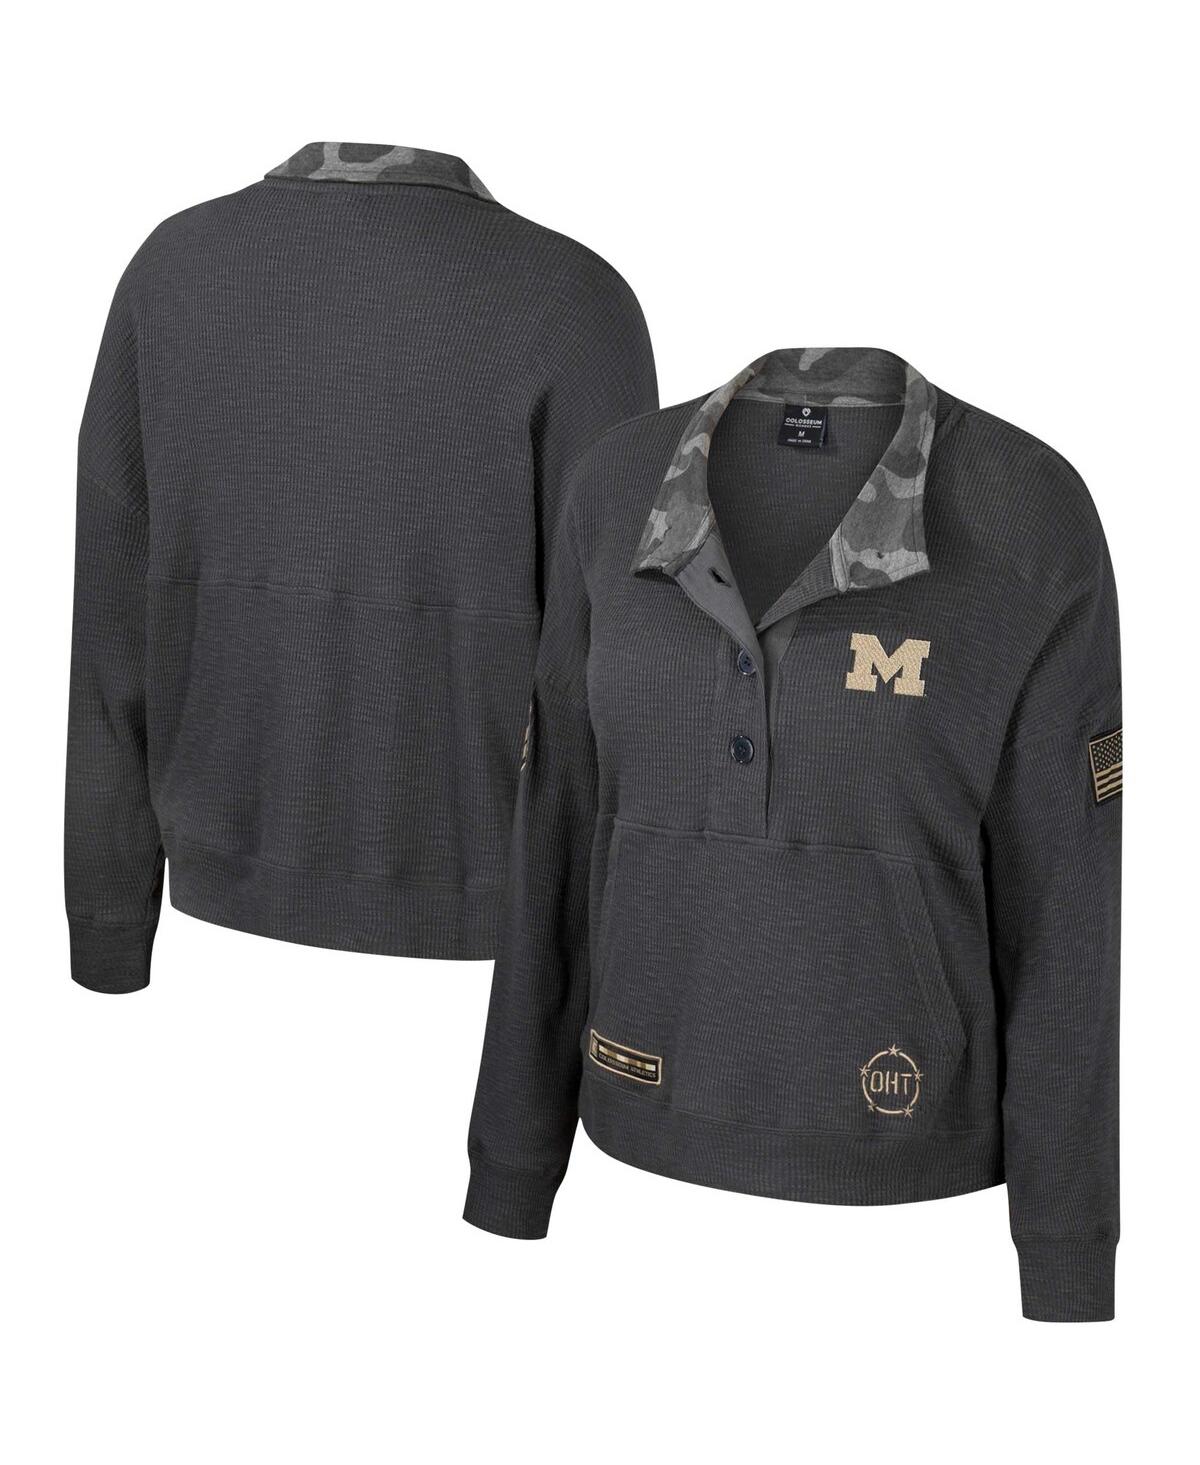 Women's Colosseum Heather Charcoal Michigan Wolverines Oht Military-Inspired Appreciation Payback Henley Thermal Sweatshirt - Heather Charcoal